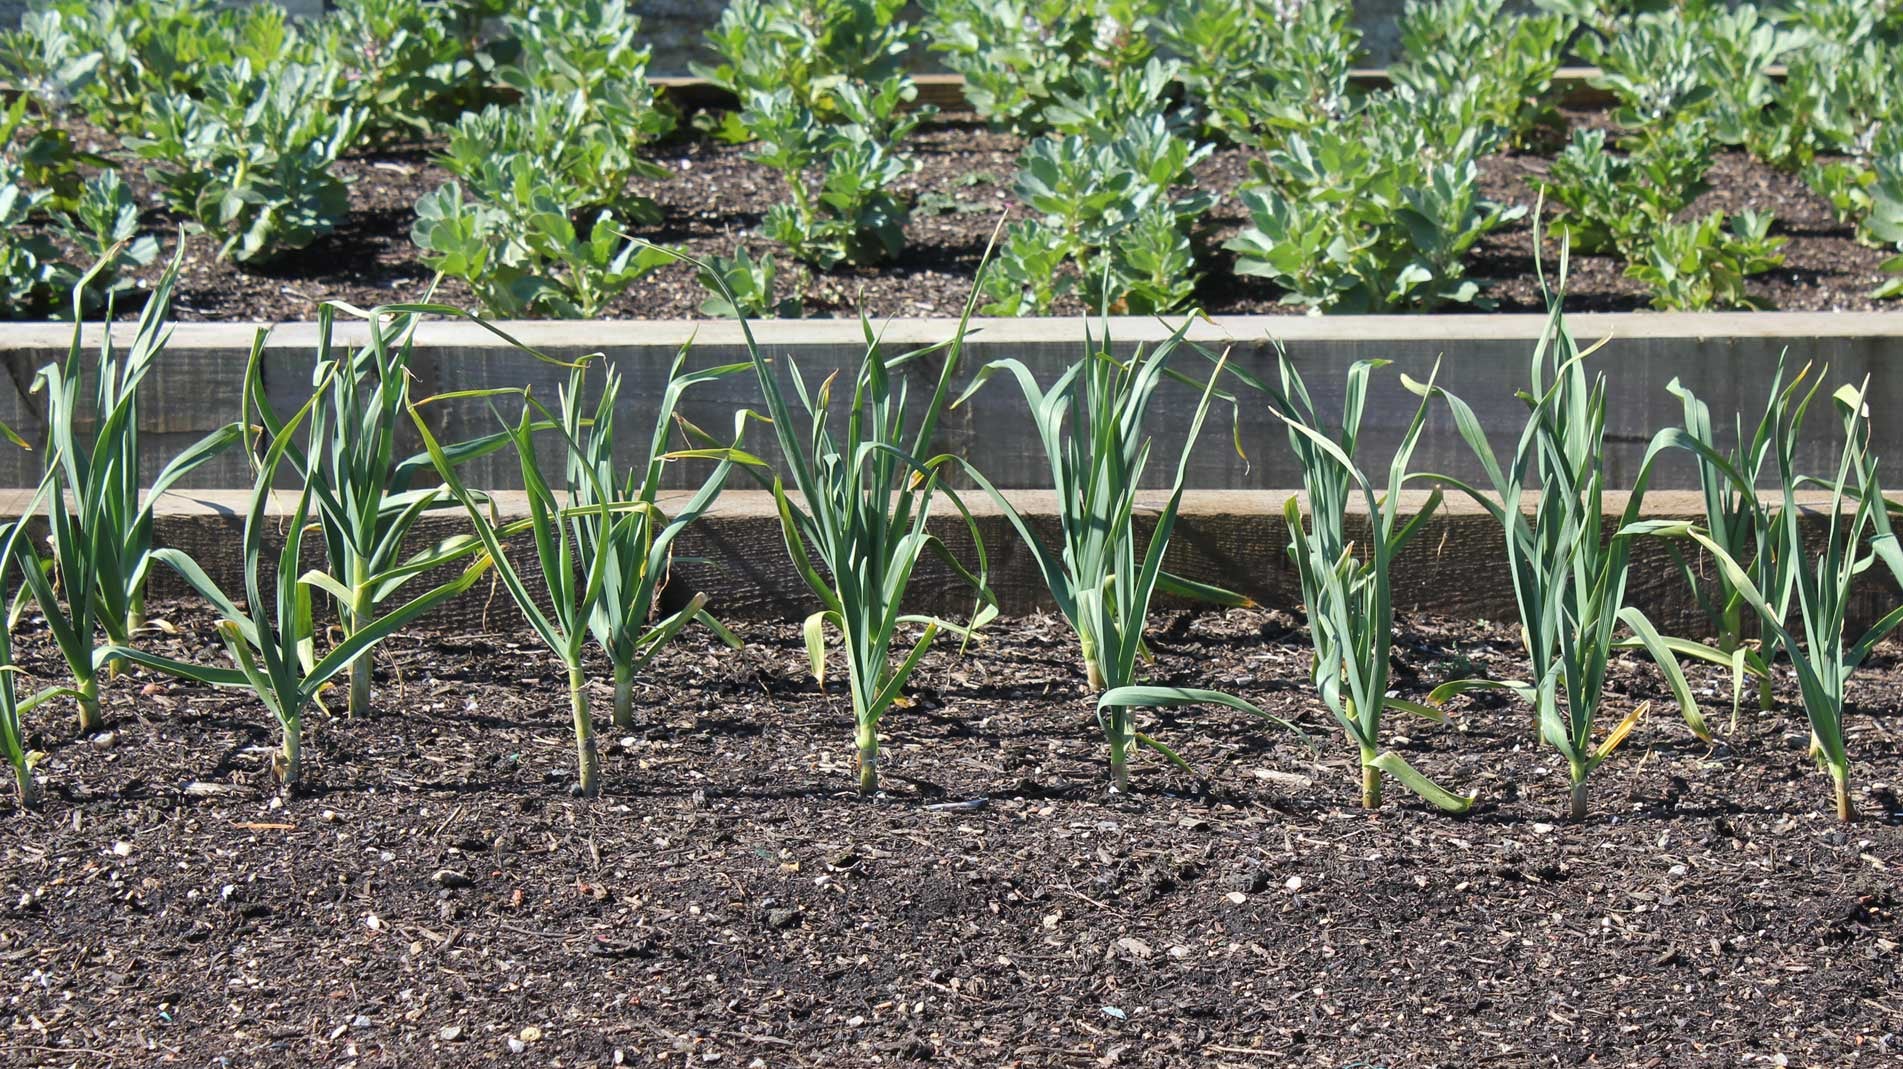 Haxnicks gardening advice how to grow onions form seed the best way